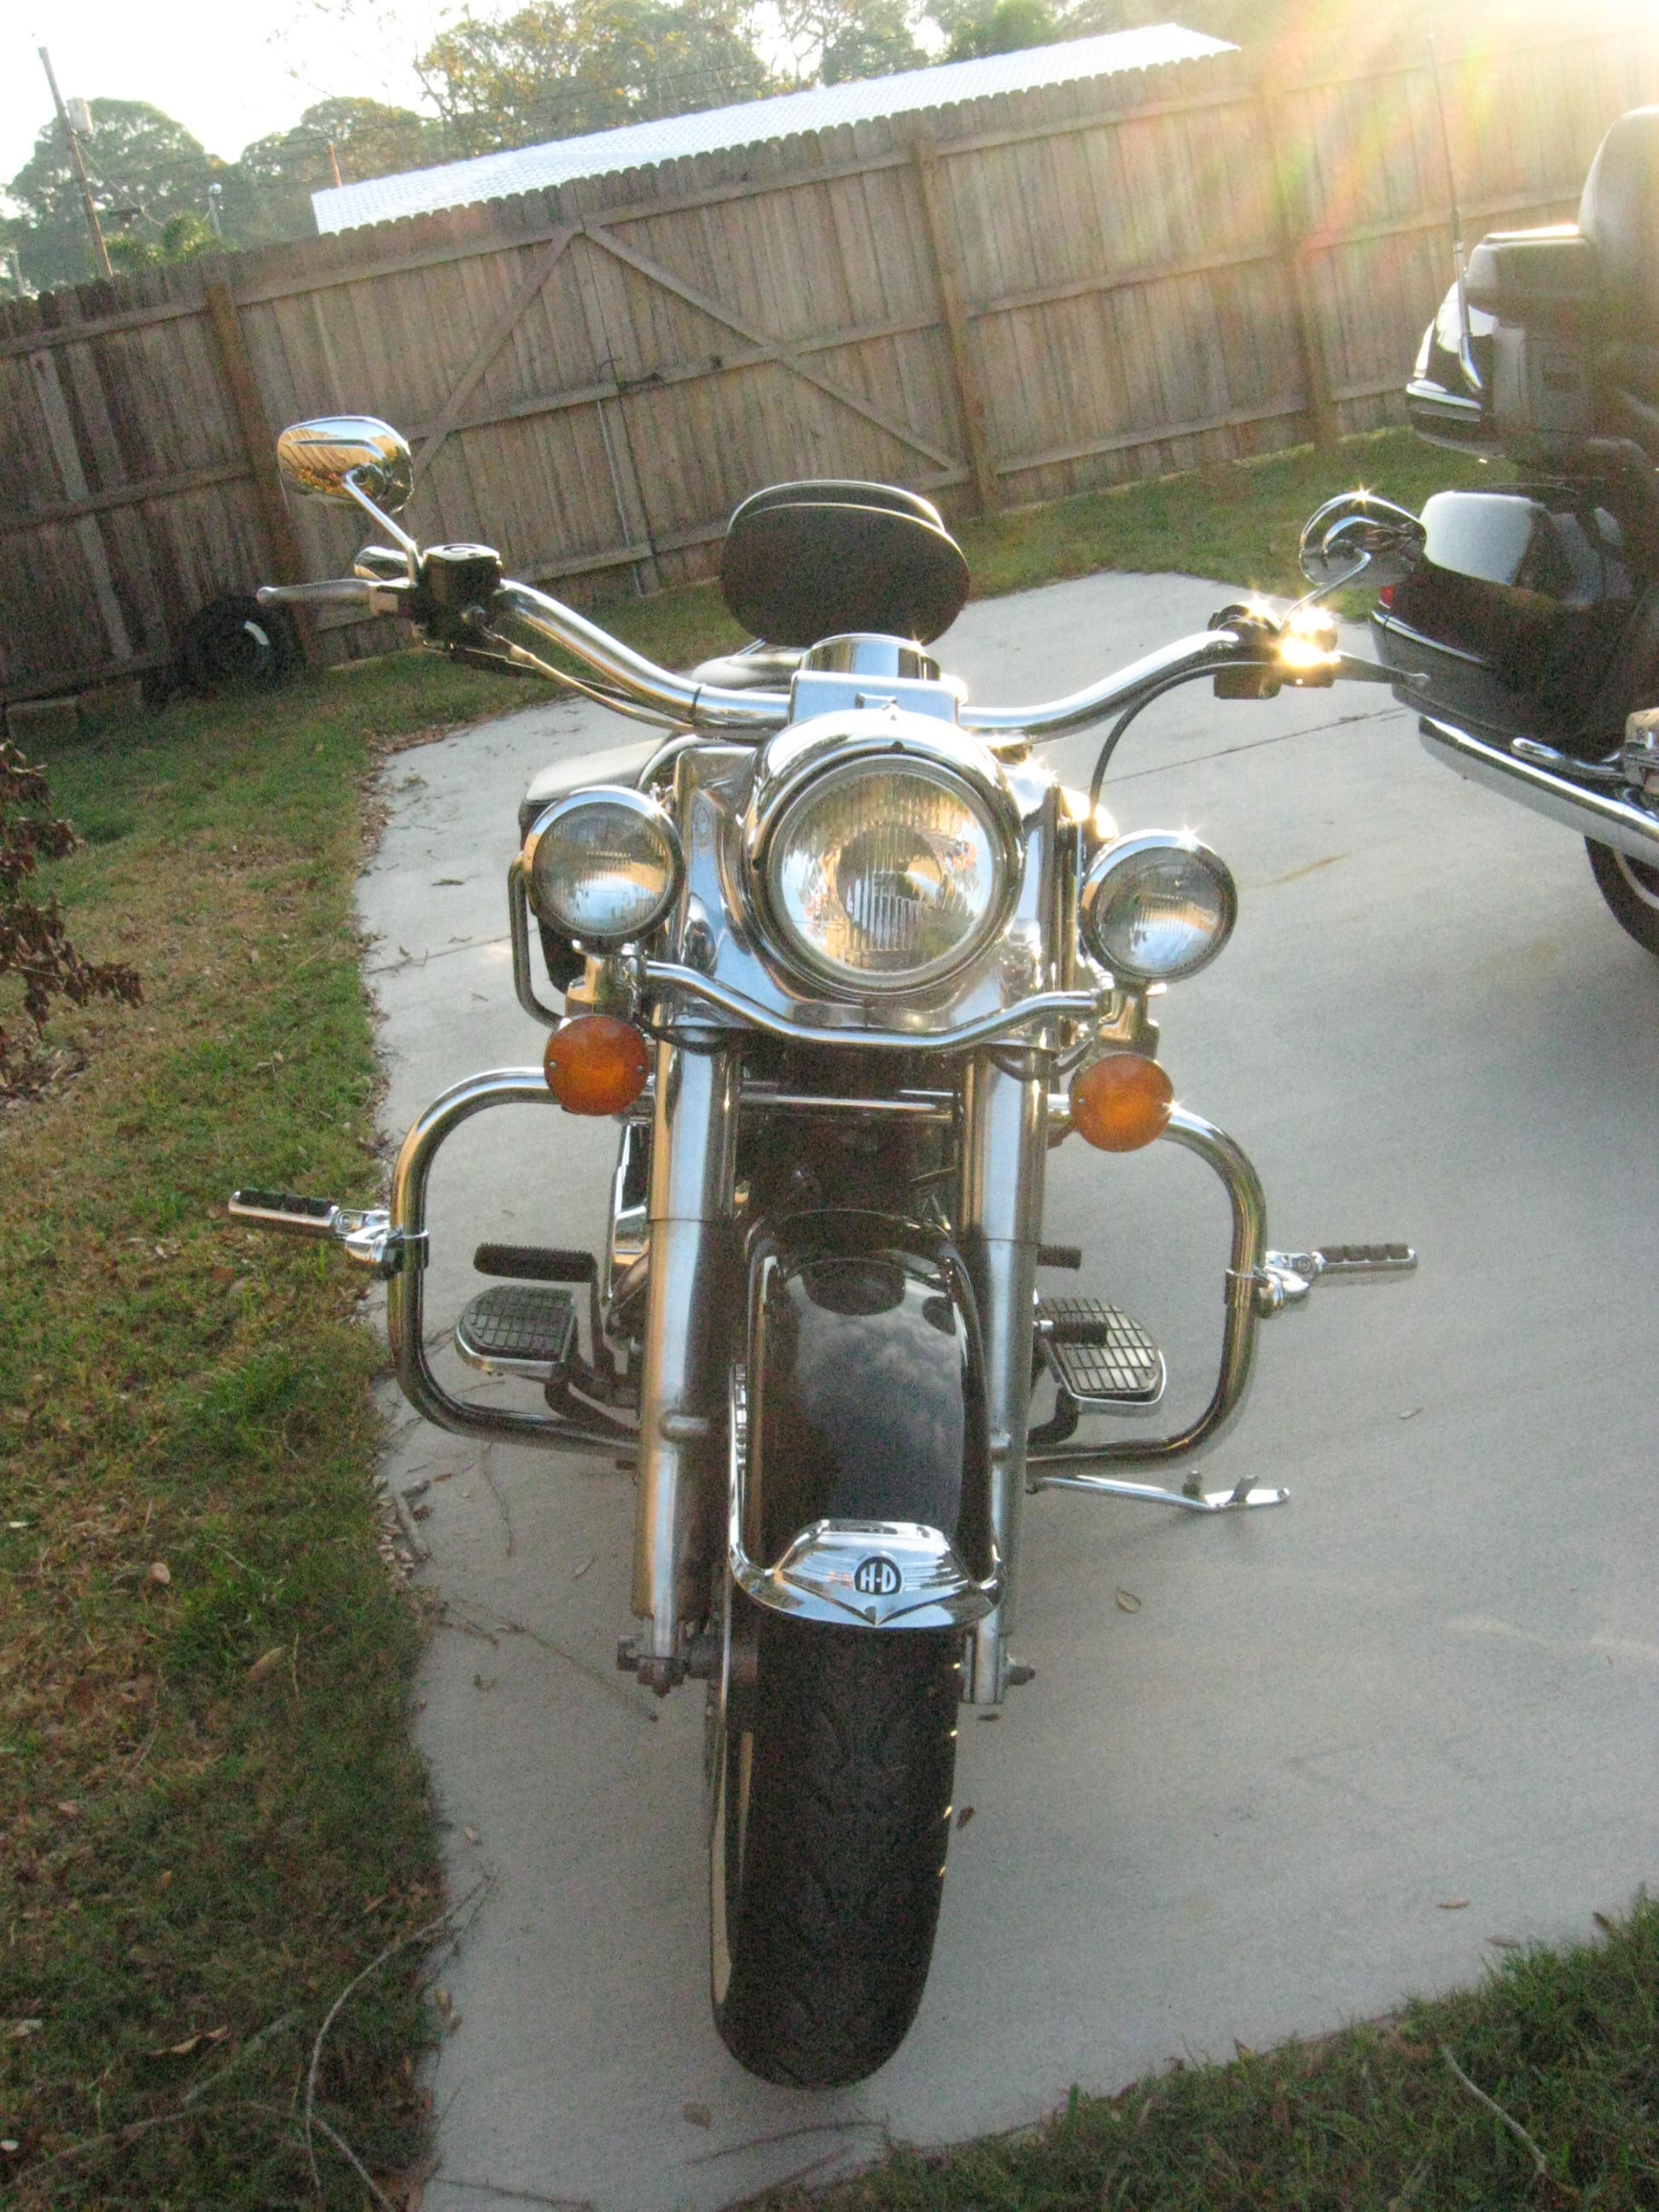 Show me your Road King Handlebars! - Page 30 - Harley ...